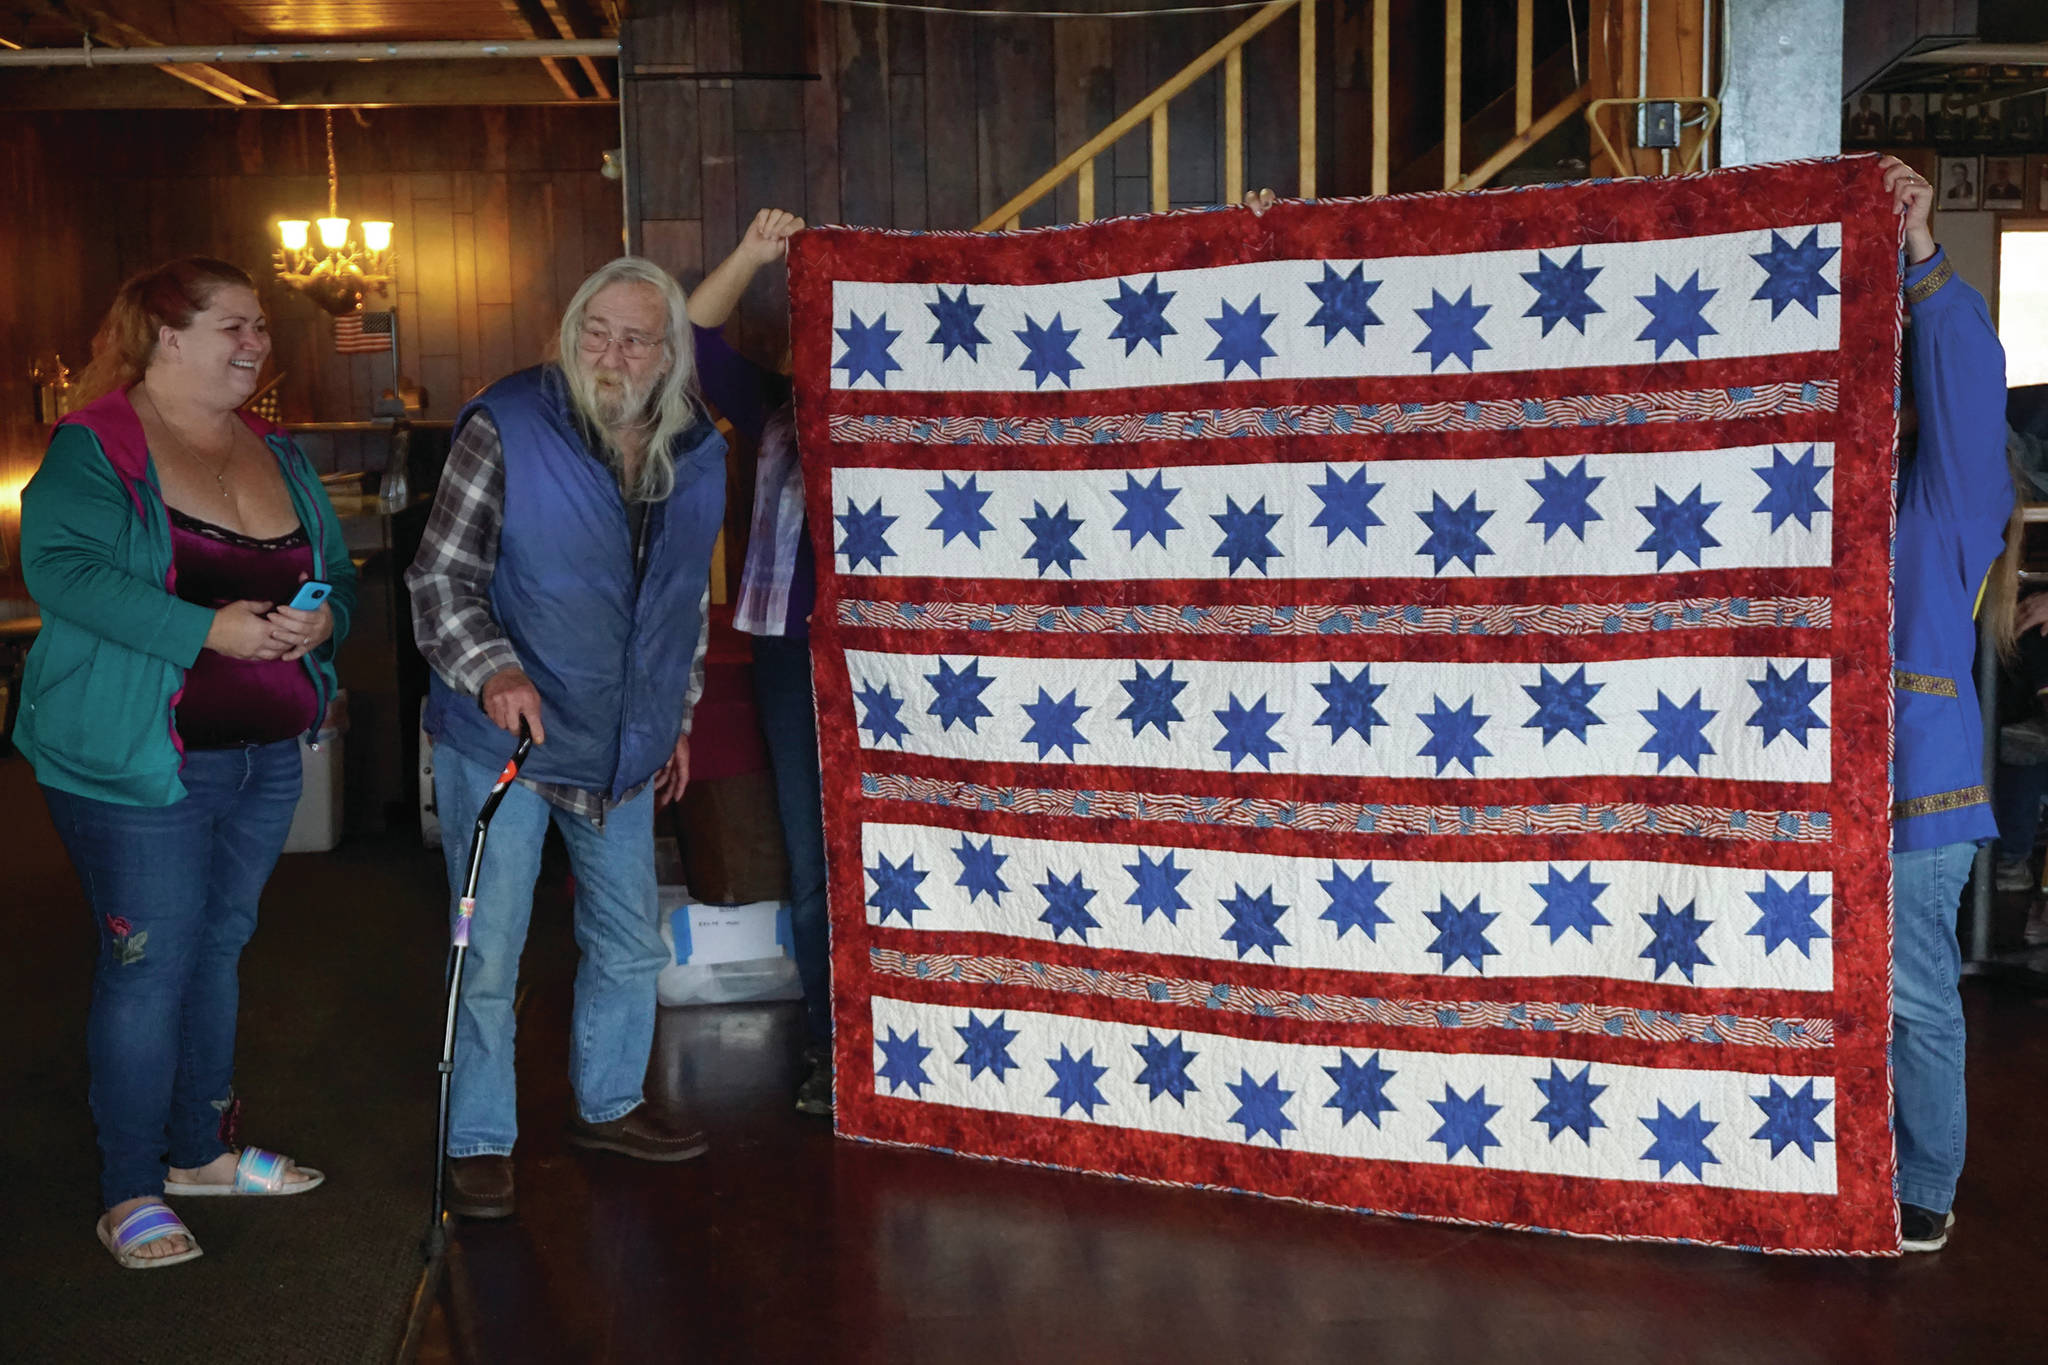 John Benya stands by a Quilt of Valor presented to him at the Veterans Day lunch held at the Elks Lodge on Nov. 11, 2019, in Homer, Alaska. To his right is his daughter, Joy Davis. Benya served in the U.S. Army from 1965-66, including a tour in Vietnam, where he was wounded in action. (Photo by Michael Armstrong/Homer News)